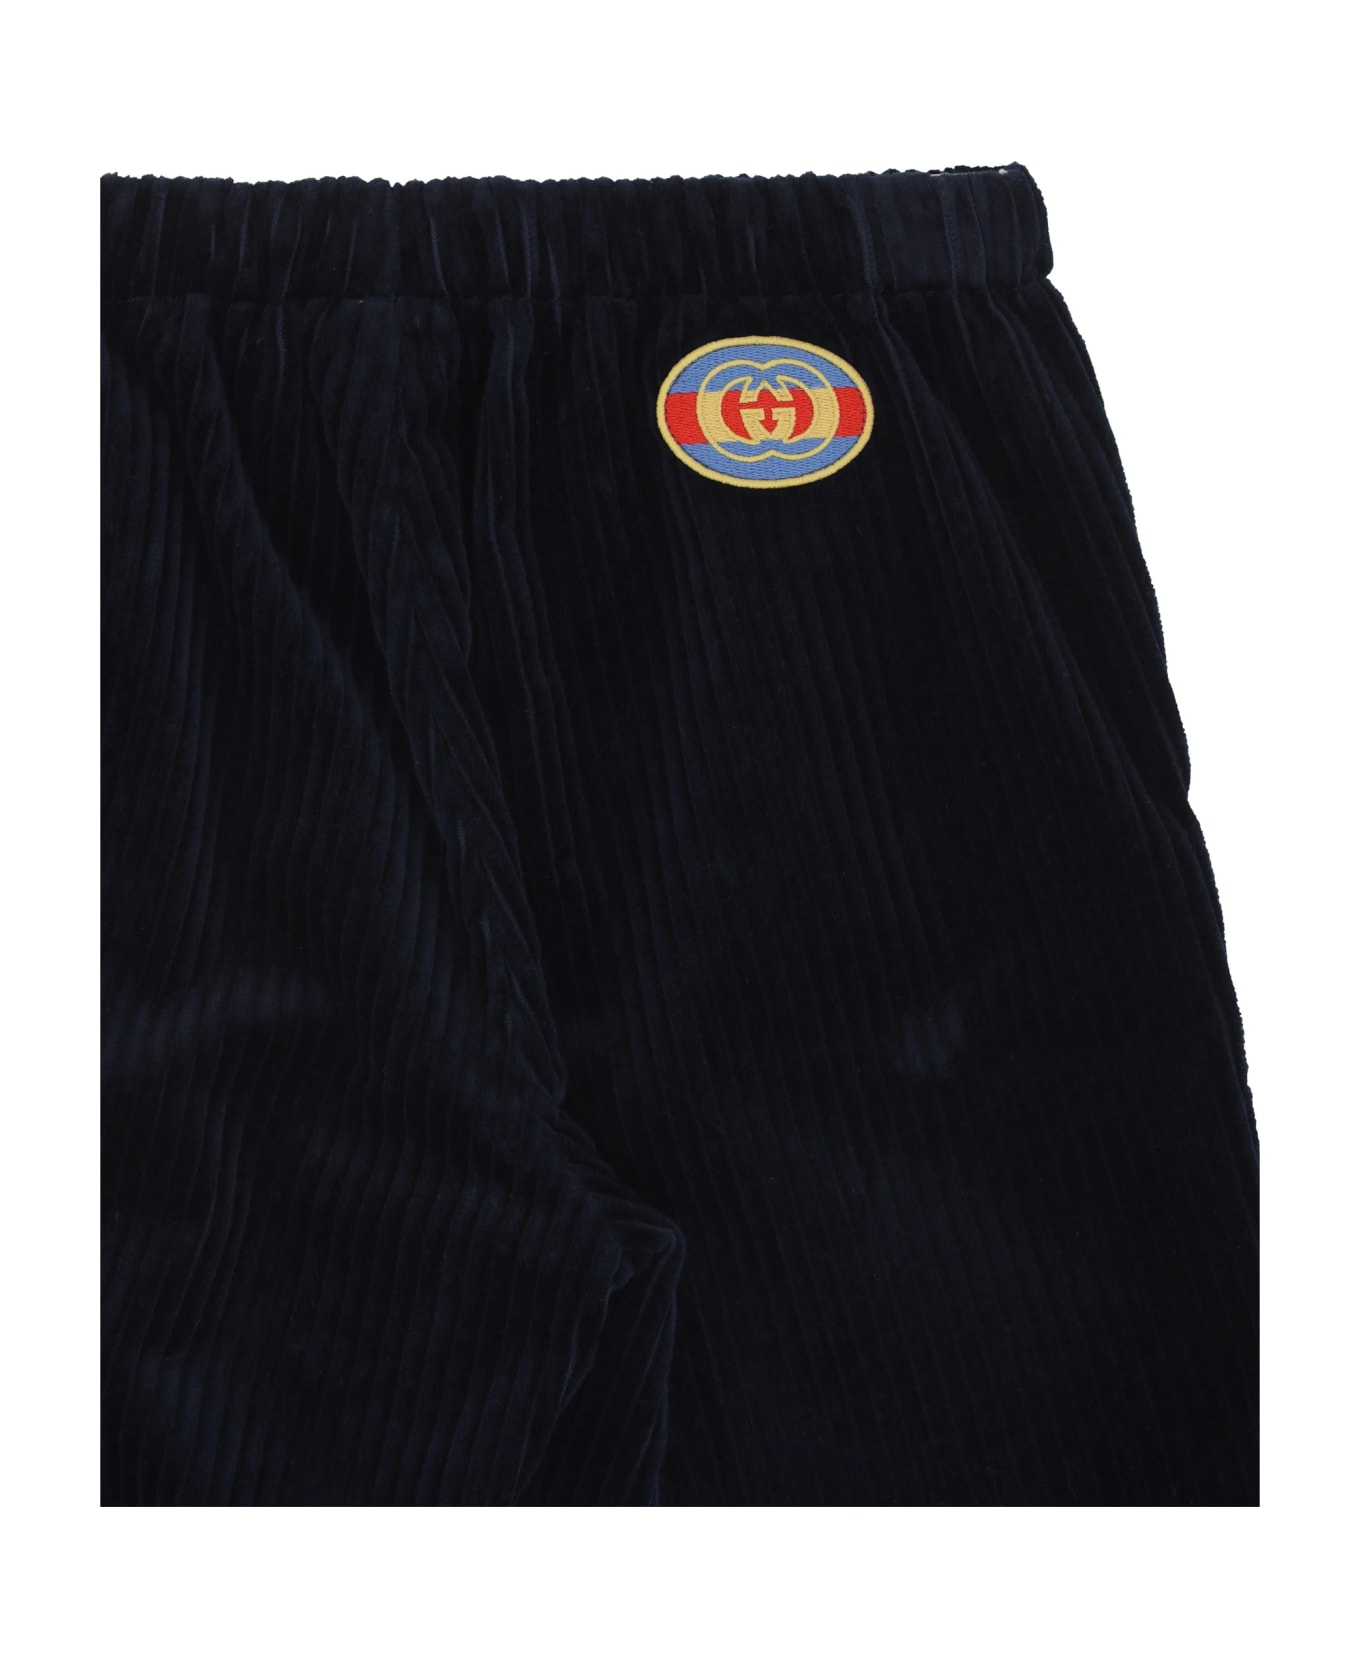 Gucci Pants For Boy - Navy